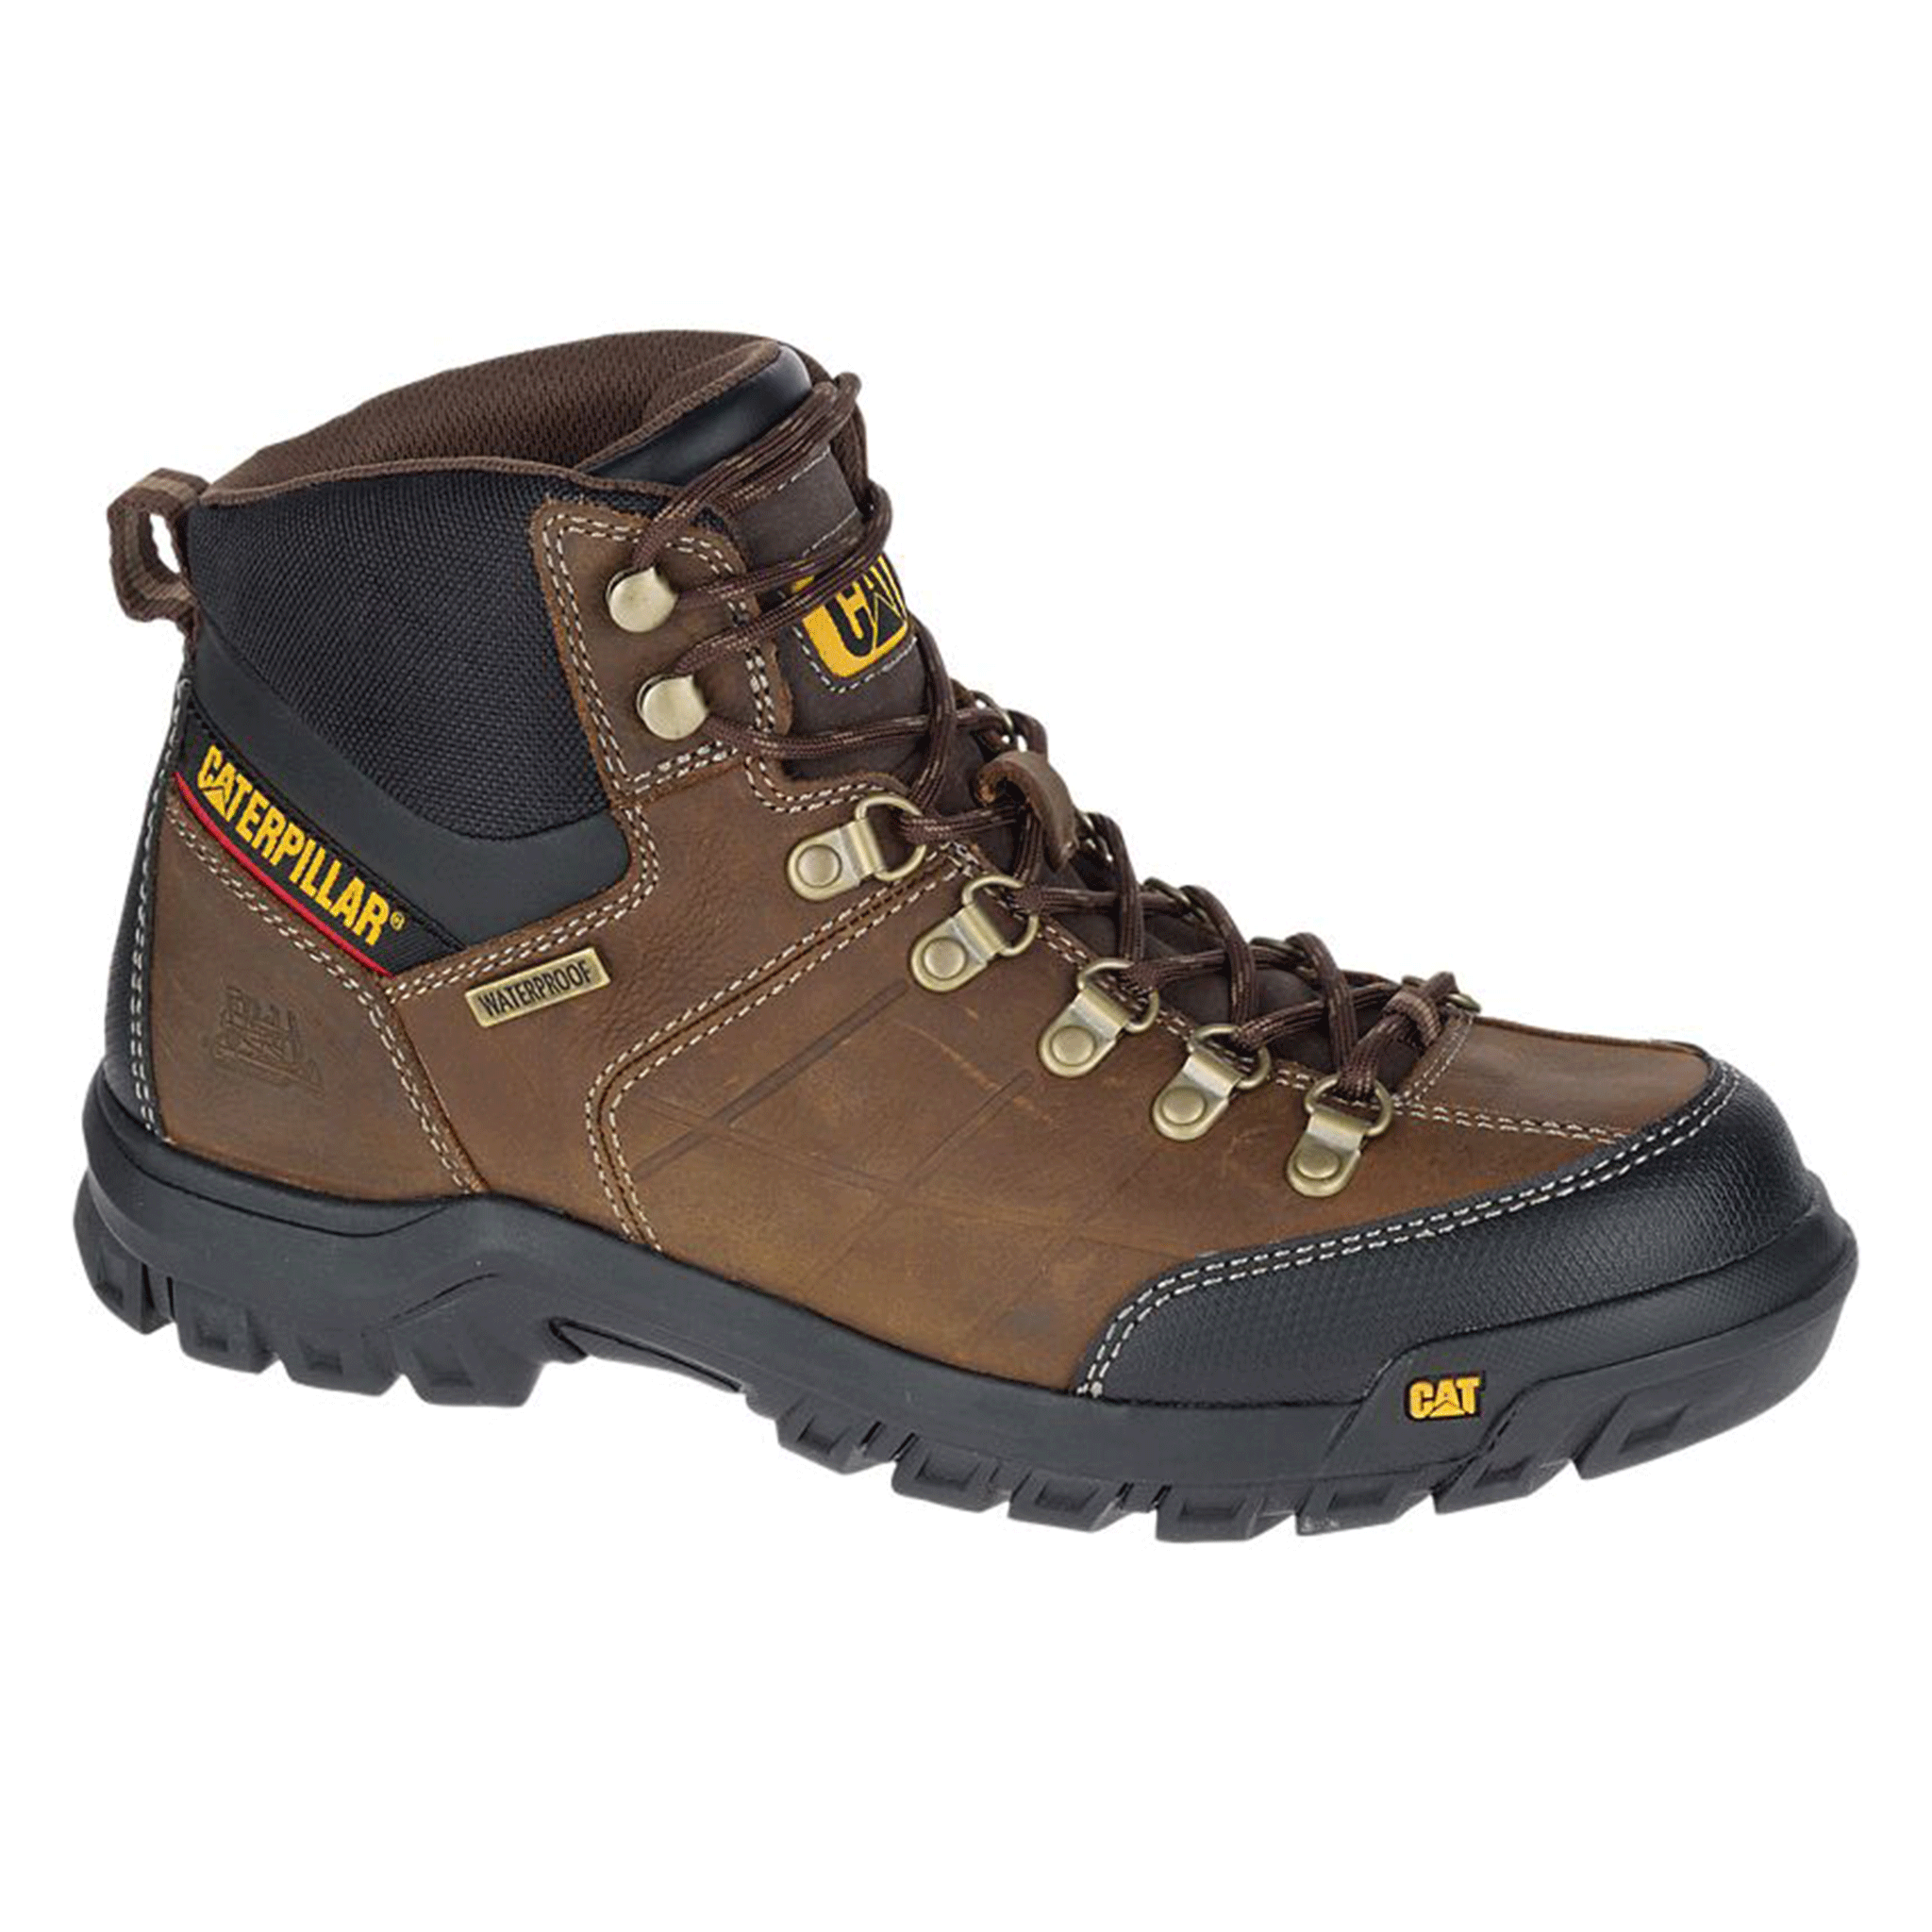 Men's Safety Shoes | Men's Work Boots | Work Authority